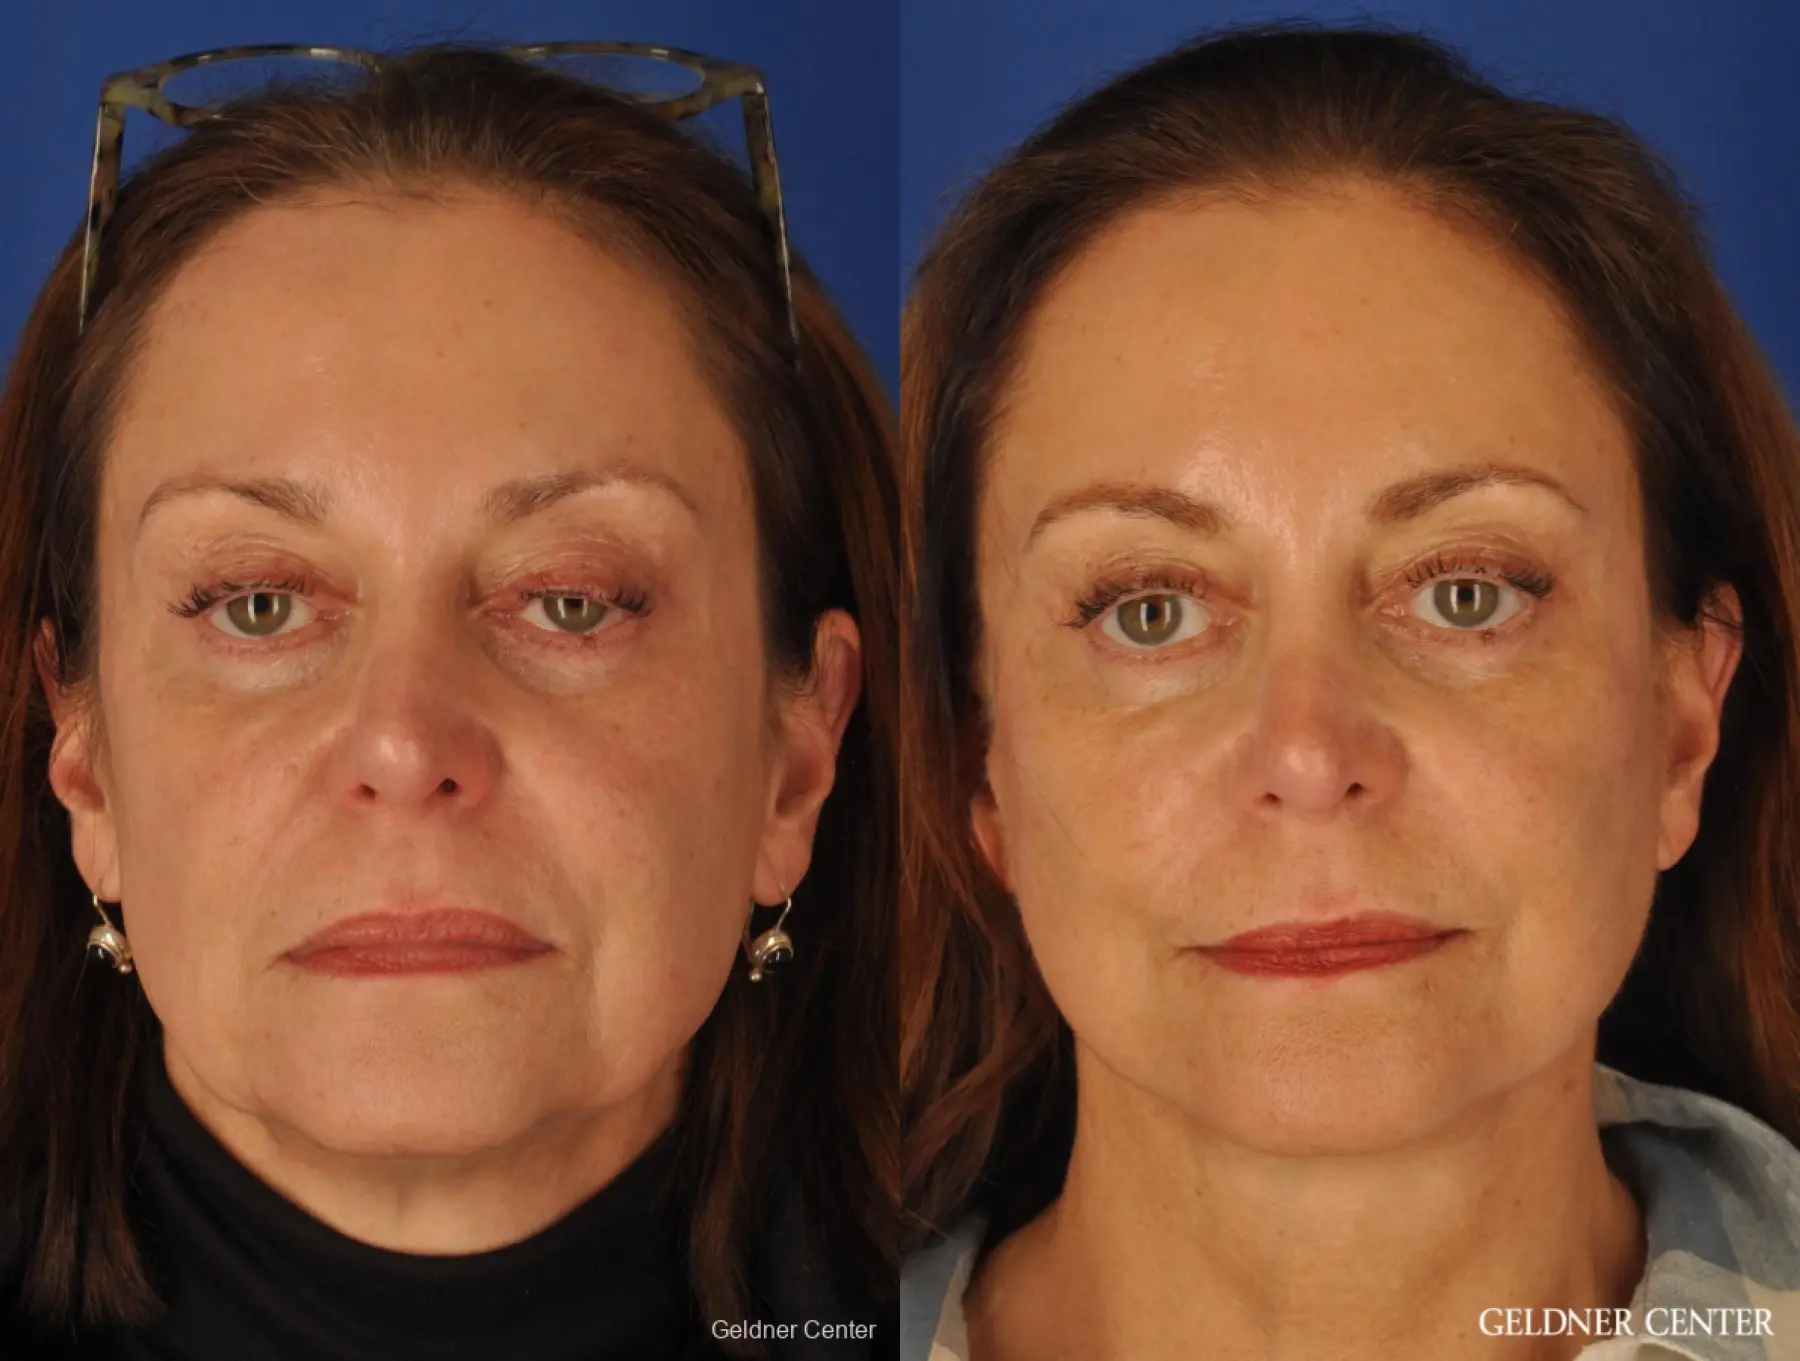 Facelift & Neck Lift: Patient 1 - Before and After  